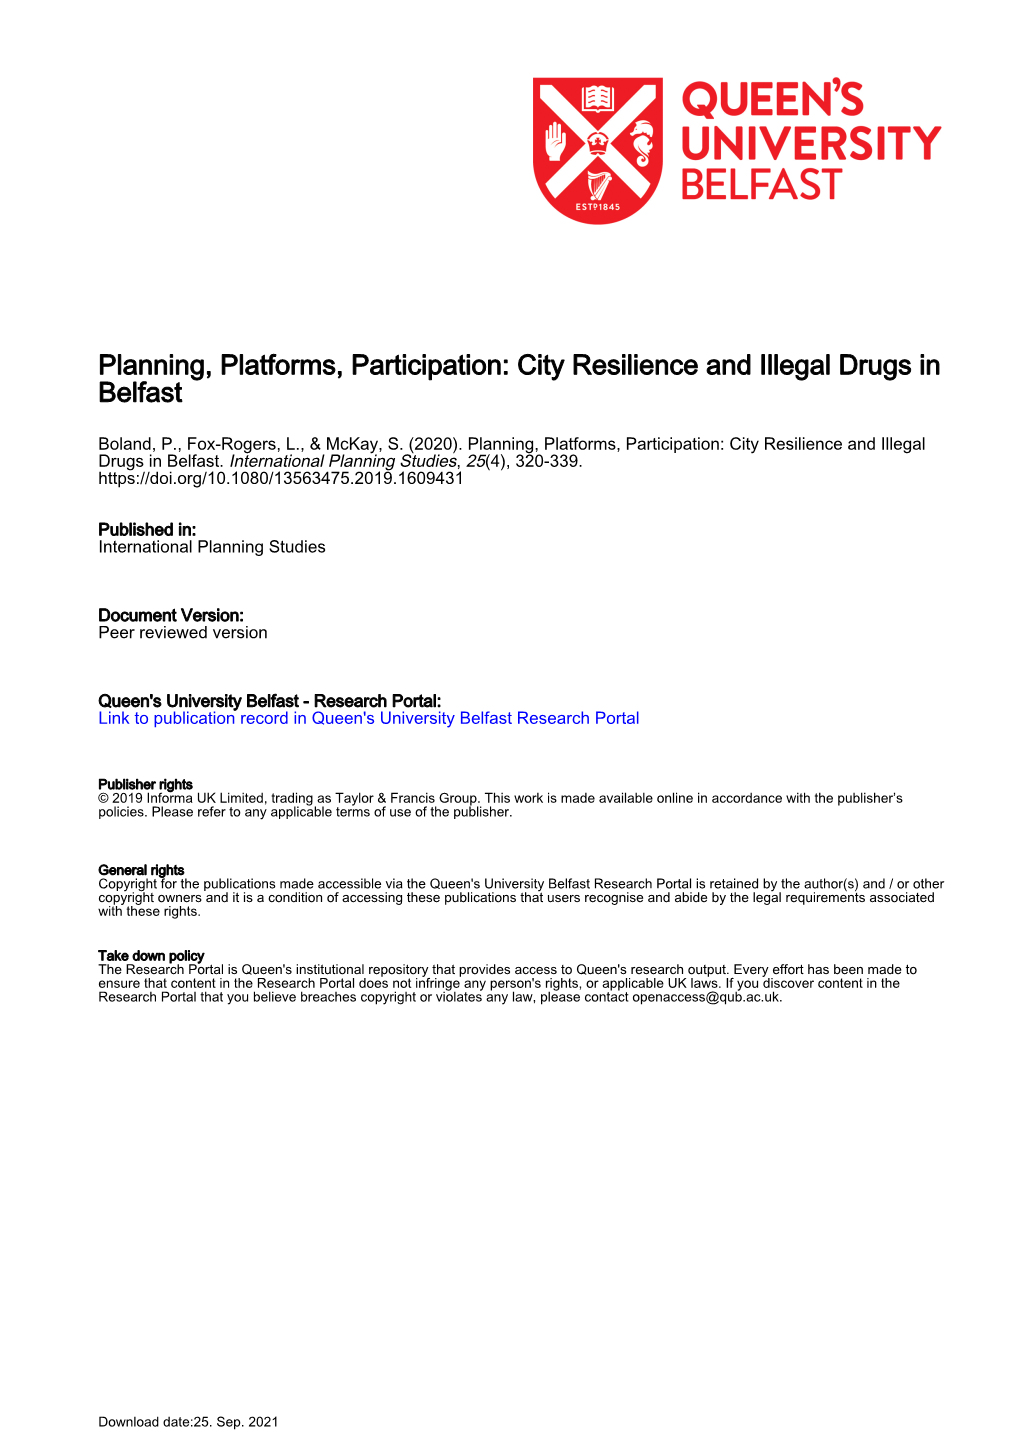 City Resilience and Illegal Drugs in Belfast